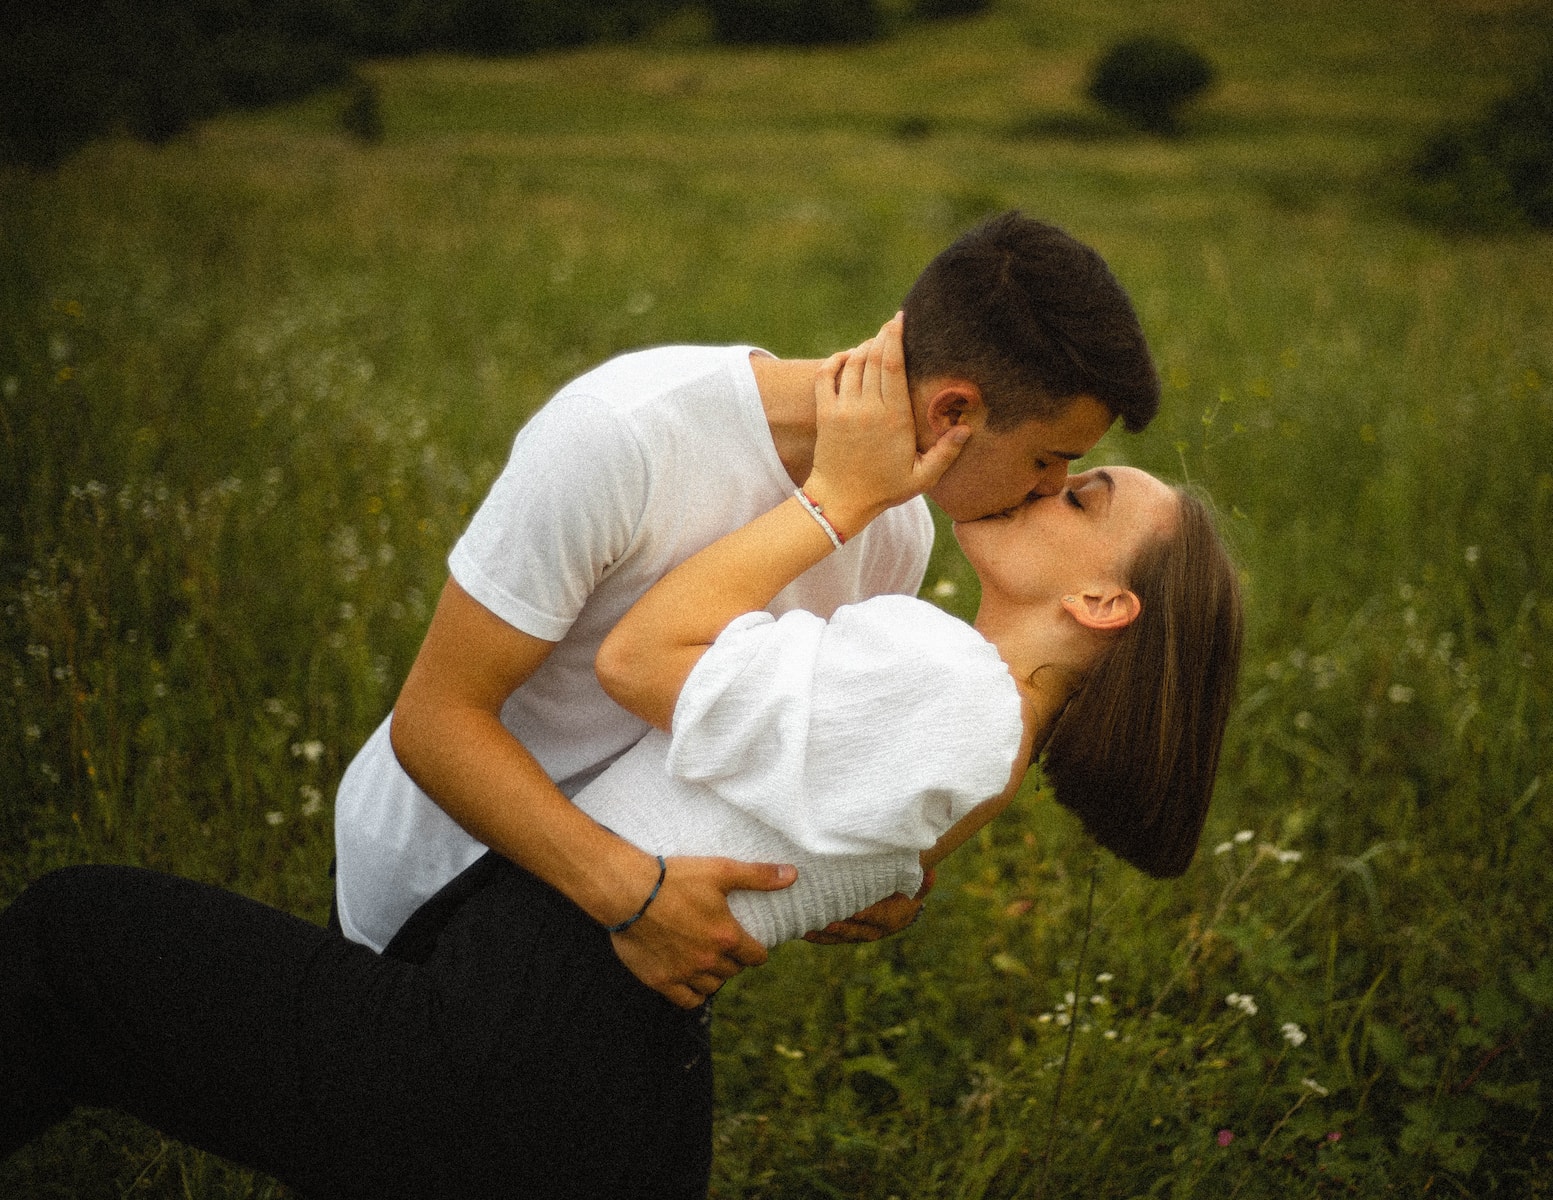 man in white t-shirt kissing woman in white shirt on green grass field during daytime